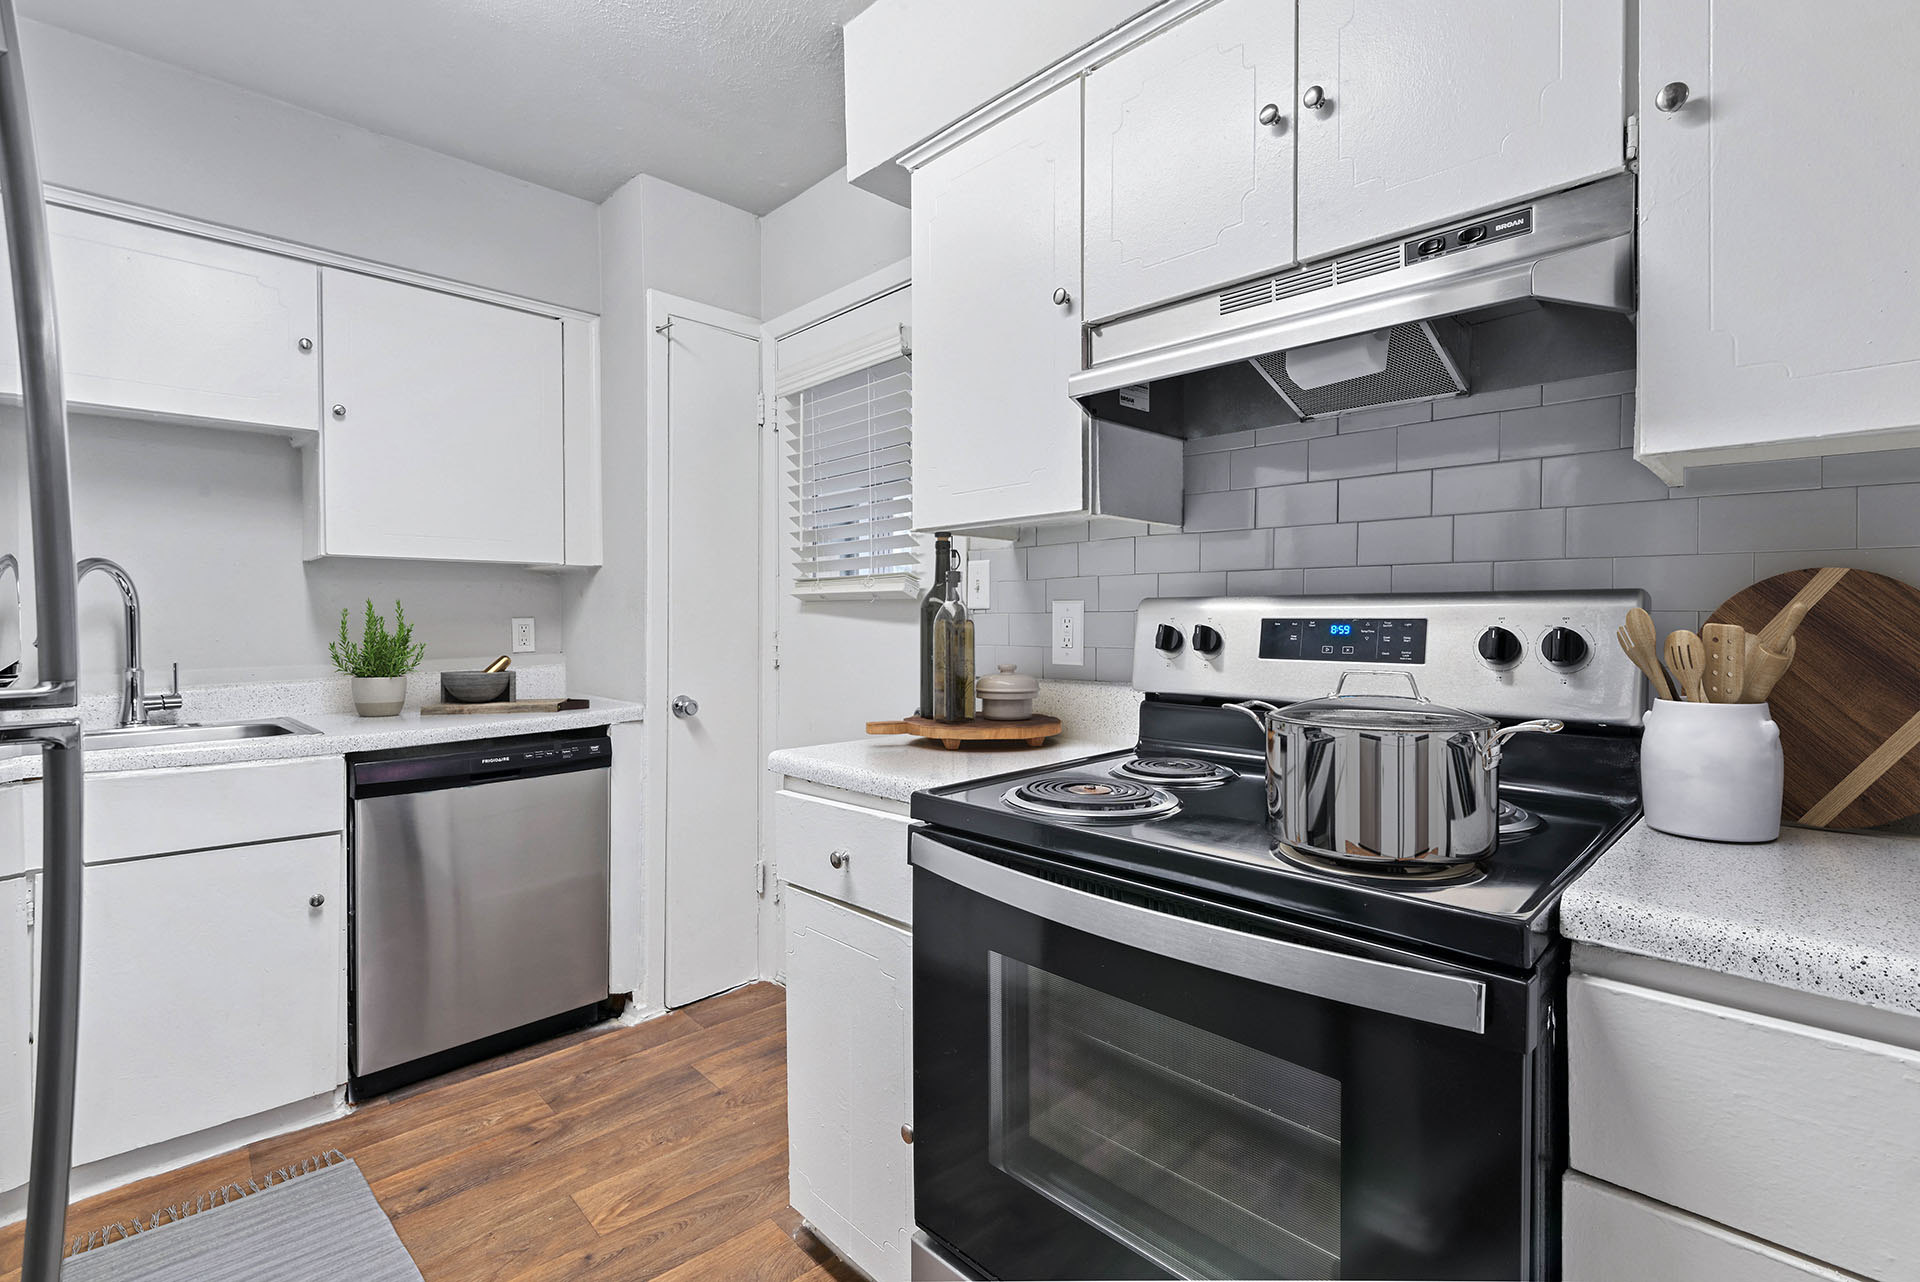 Upgraded kitchen with Stainless Steel Appliances and Resurfaced Countertops